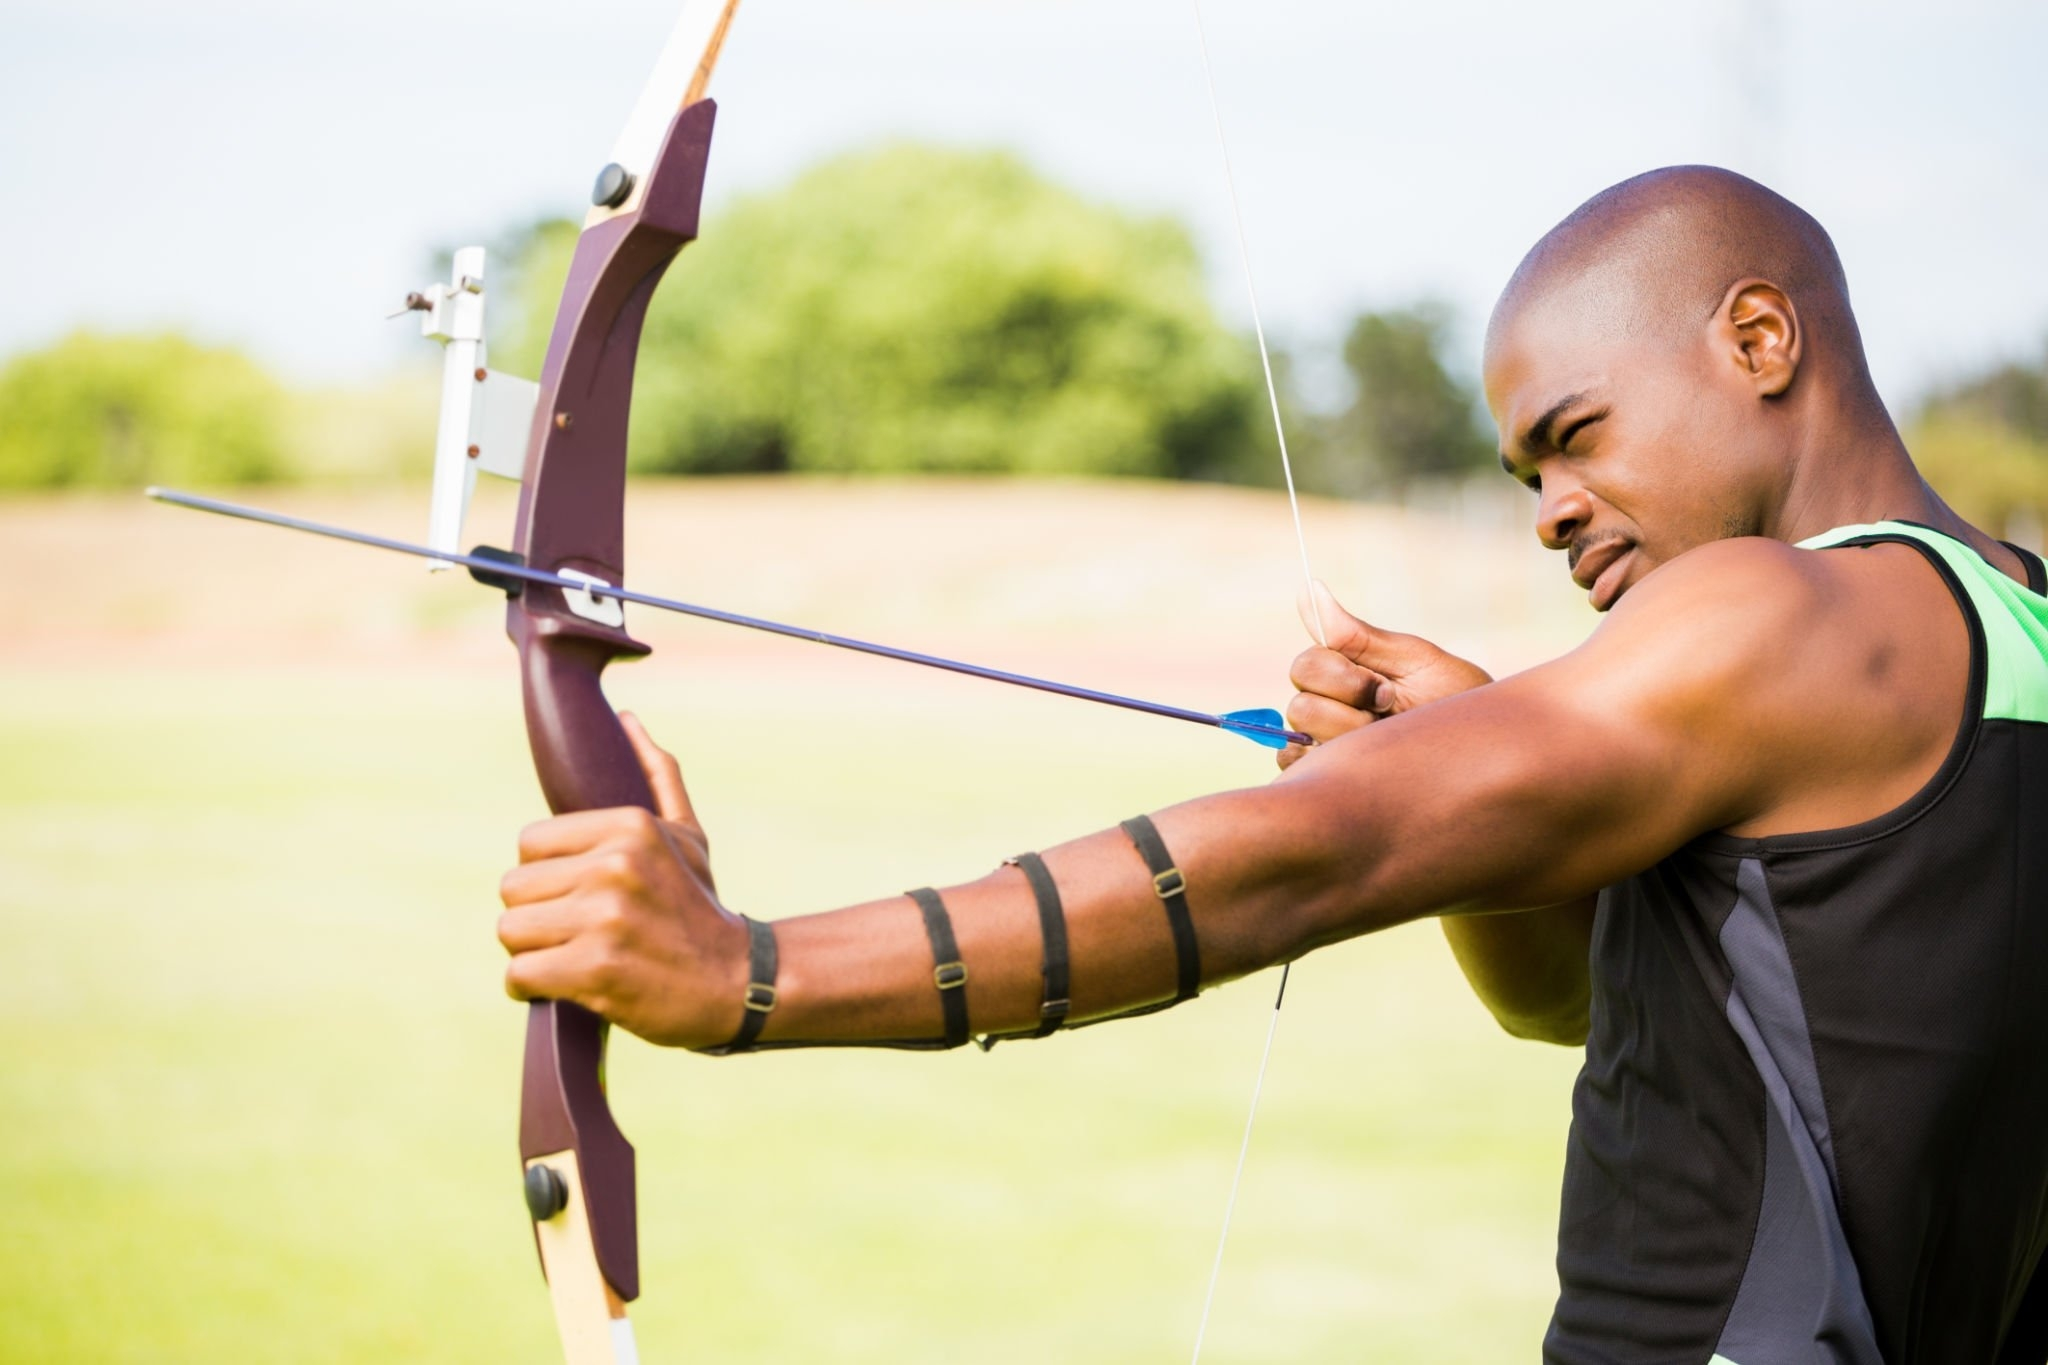 How Far is the Target in Olympic Archery?